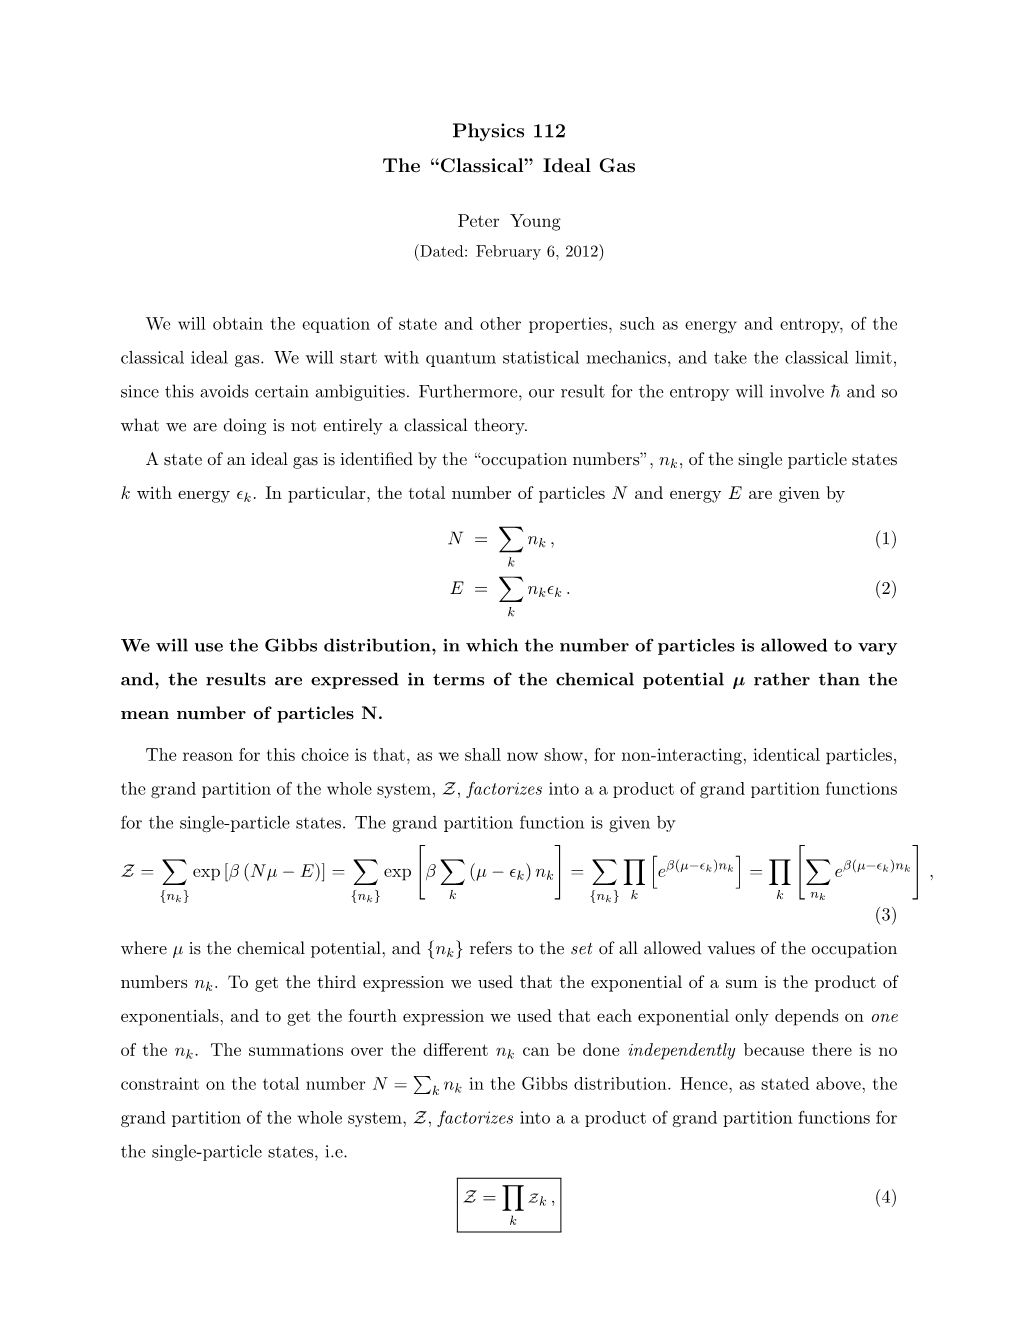 Physics 112 the “Classical” Ideal Gas